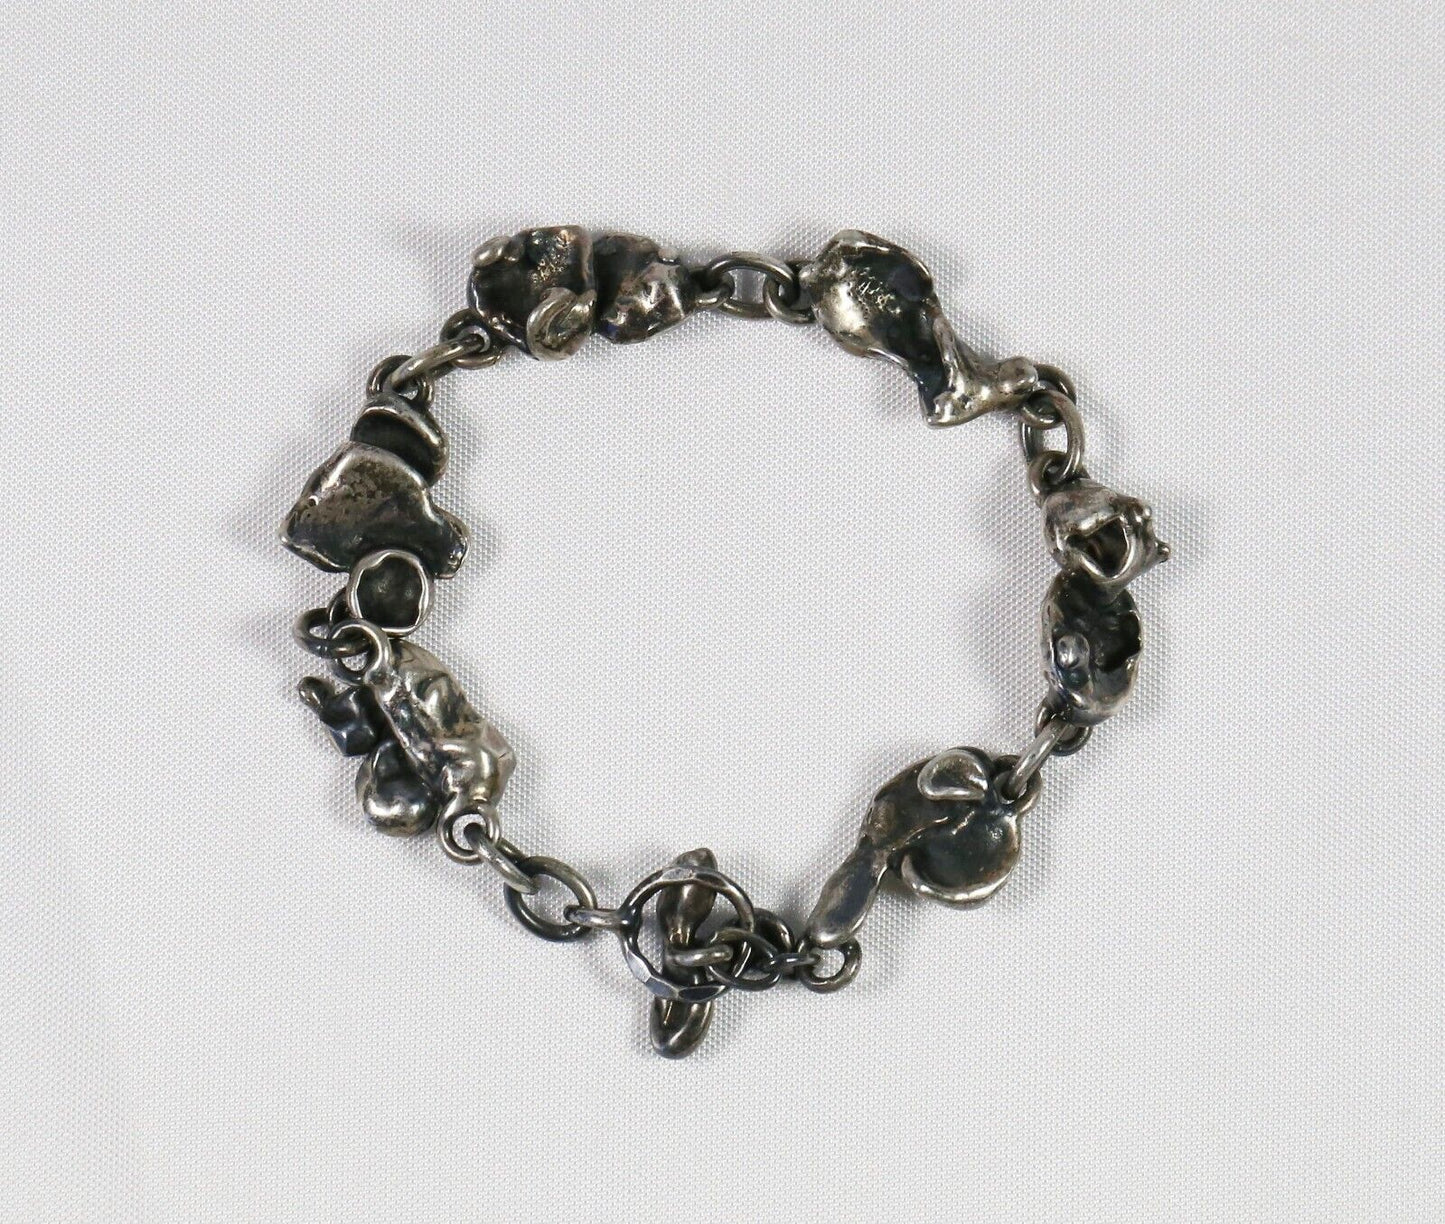 Antique Sterling Silver Nugget Bracelet, 8 inches - 34.5g